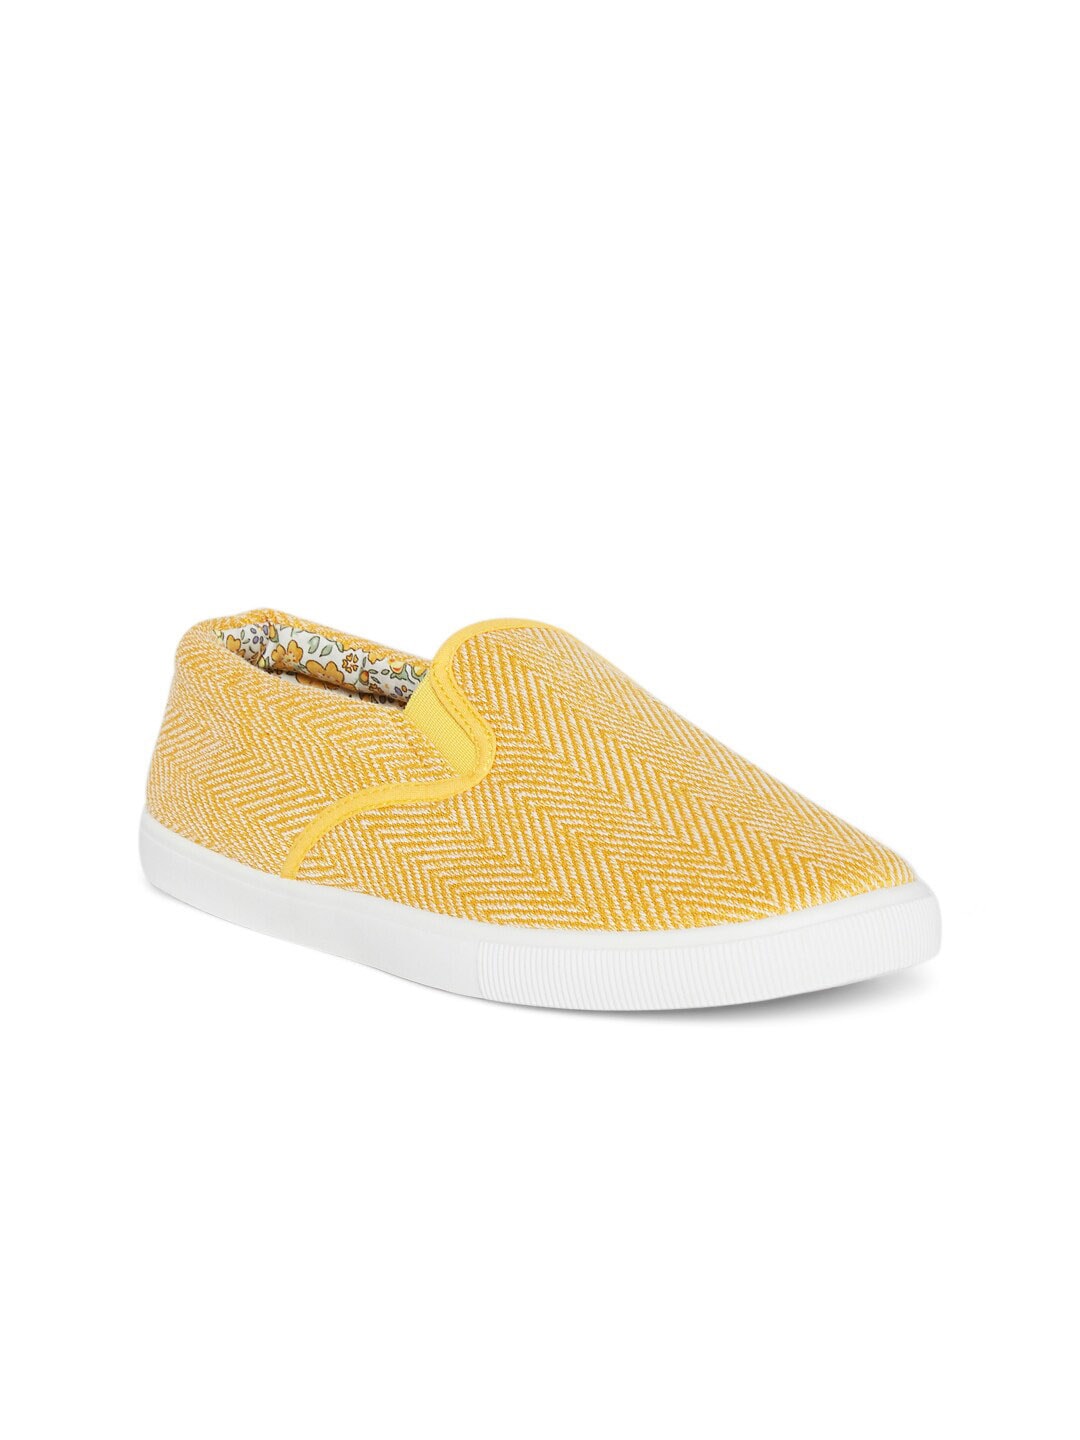 Forever Glam by Pantaloons Women Yellow Woven Design Slip-On Sneakers Price in India